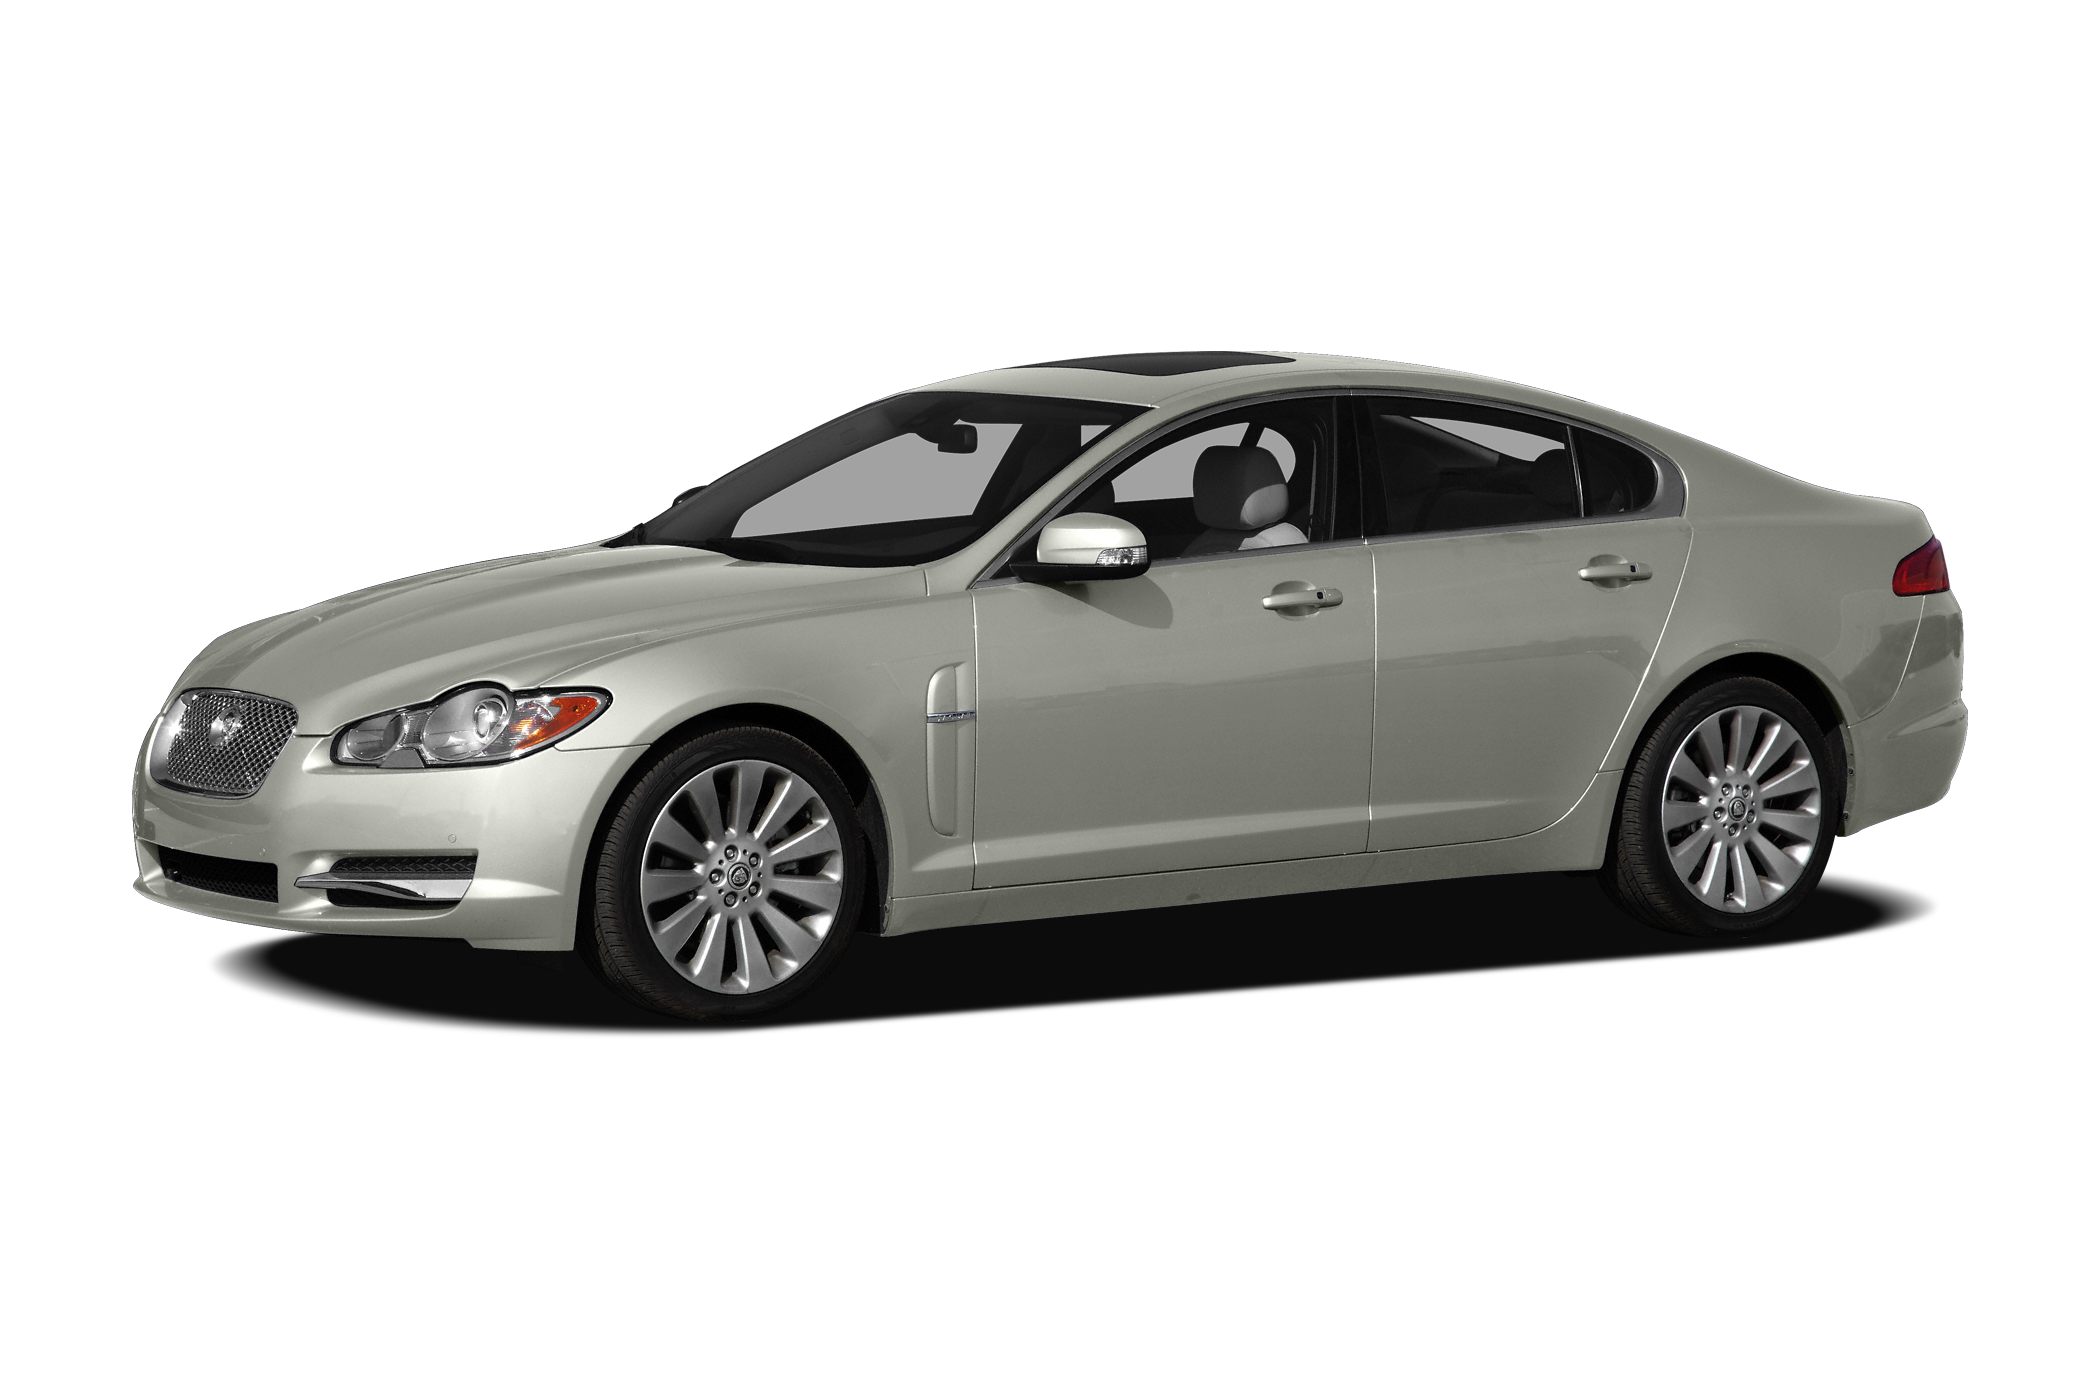 2010 Jaguar Xf Supercharged 4dr Sedan Specs And Prices